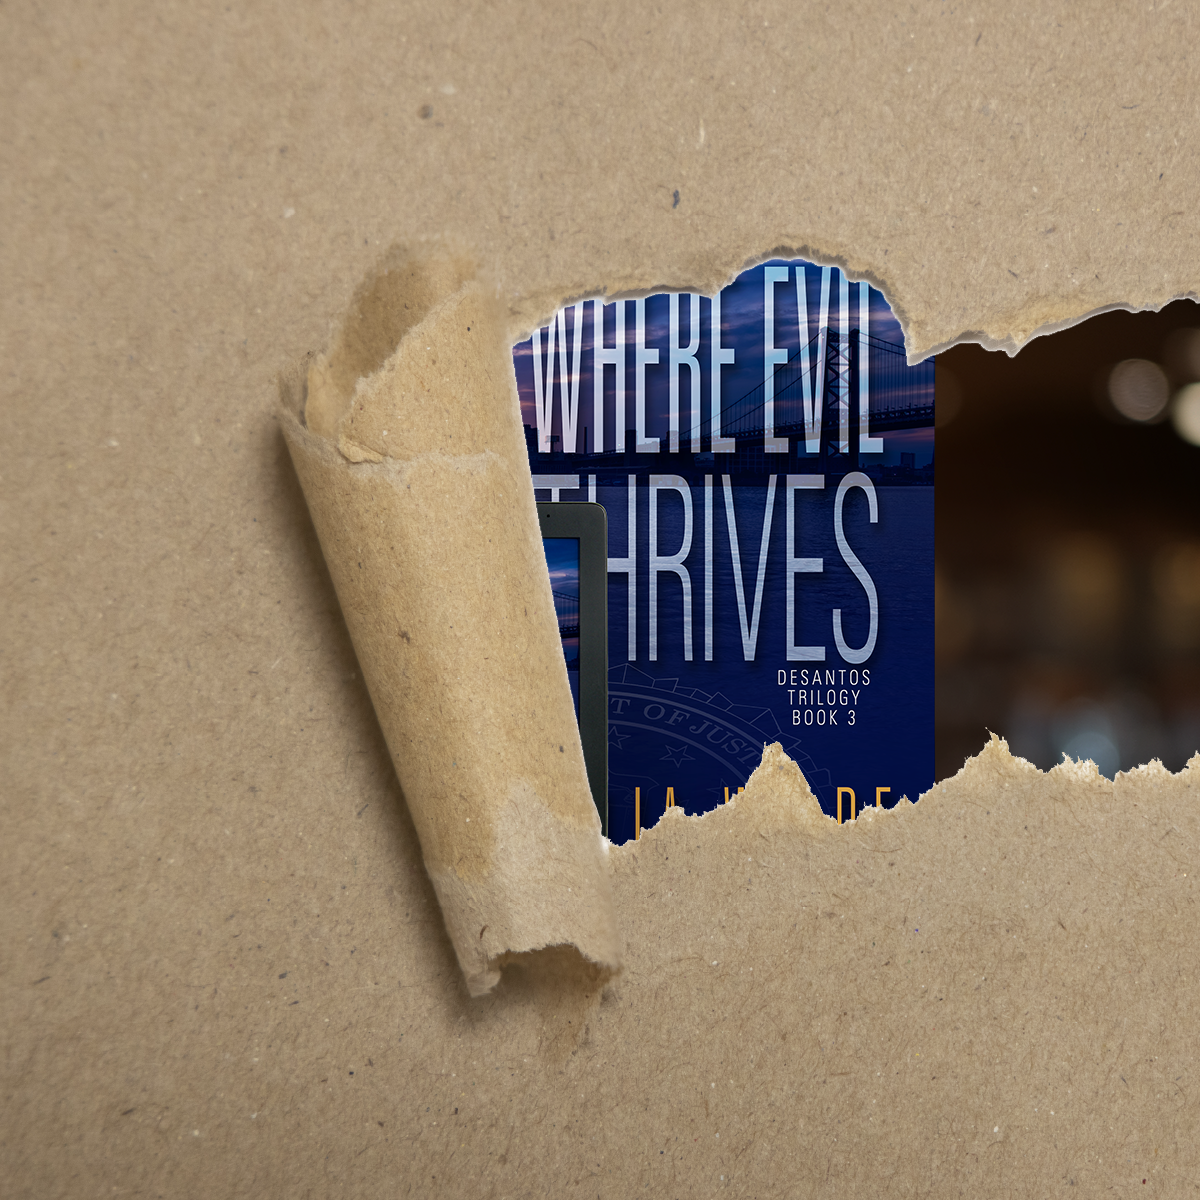 Torn brown paper reveals a portion of the new cover for "Where Evil Thrives" coming in October